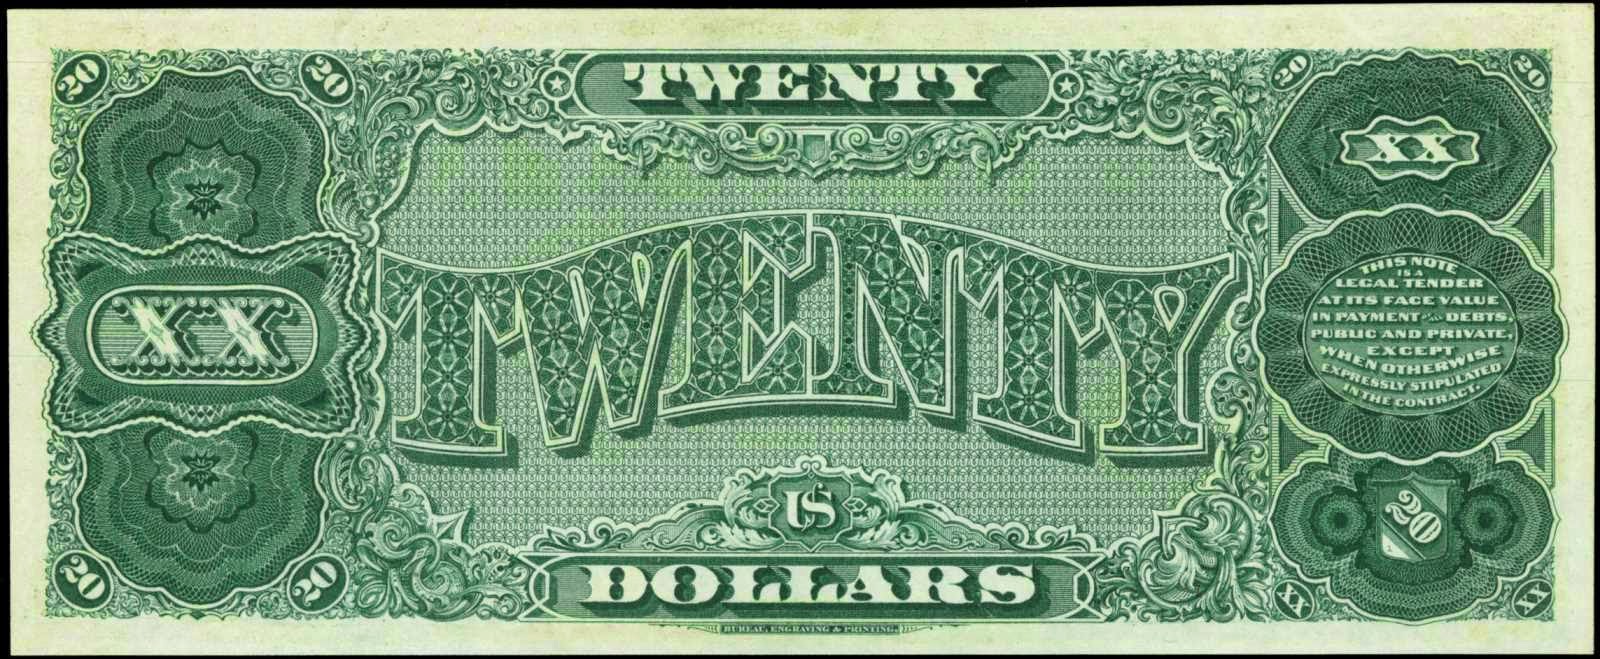 20 US Dollars Treasury or Coin Note, Series of 1890